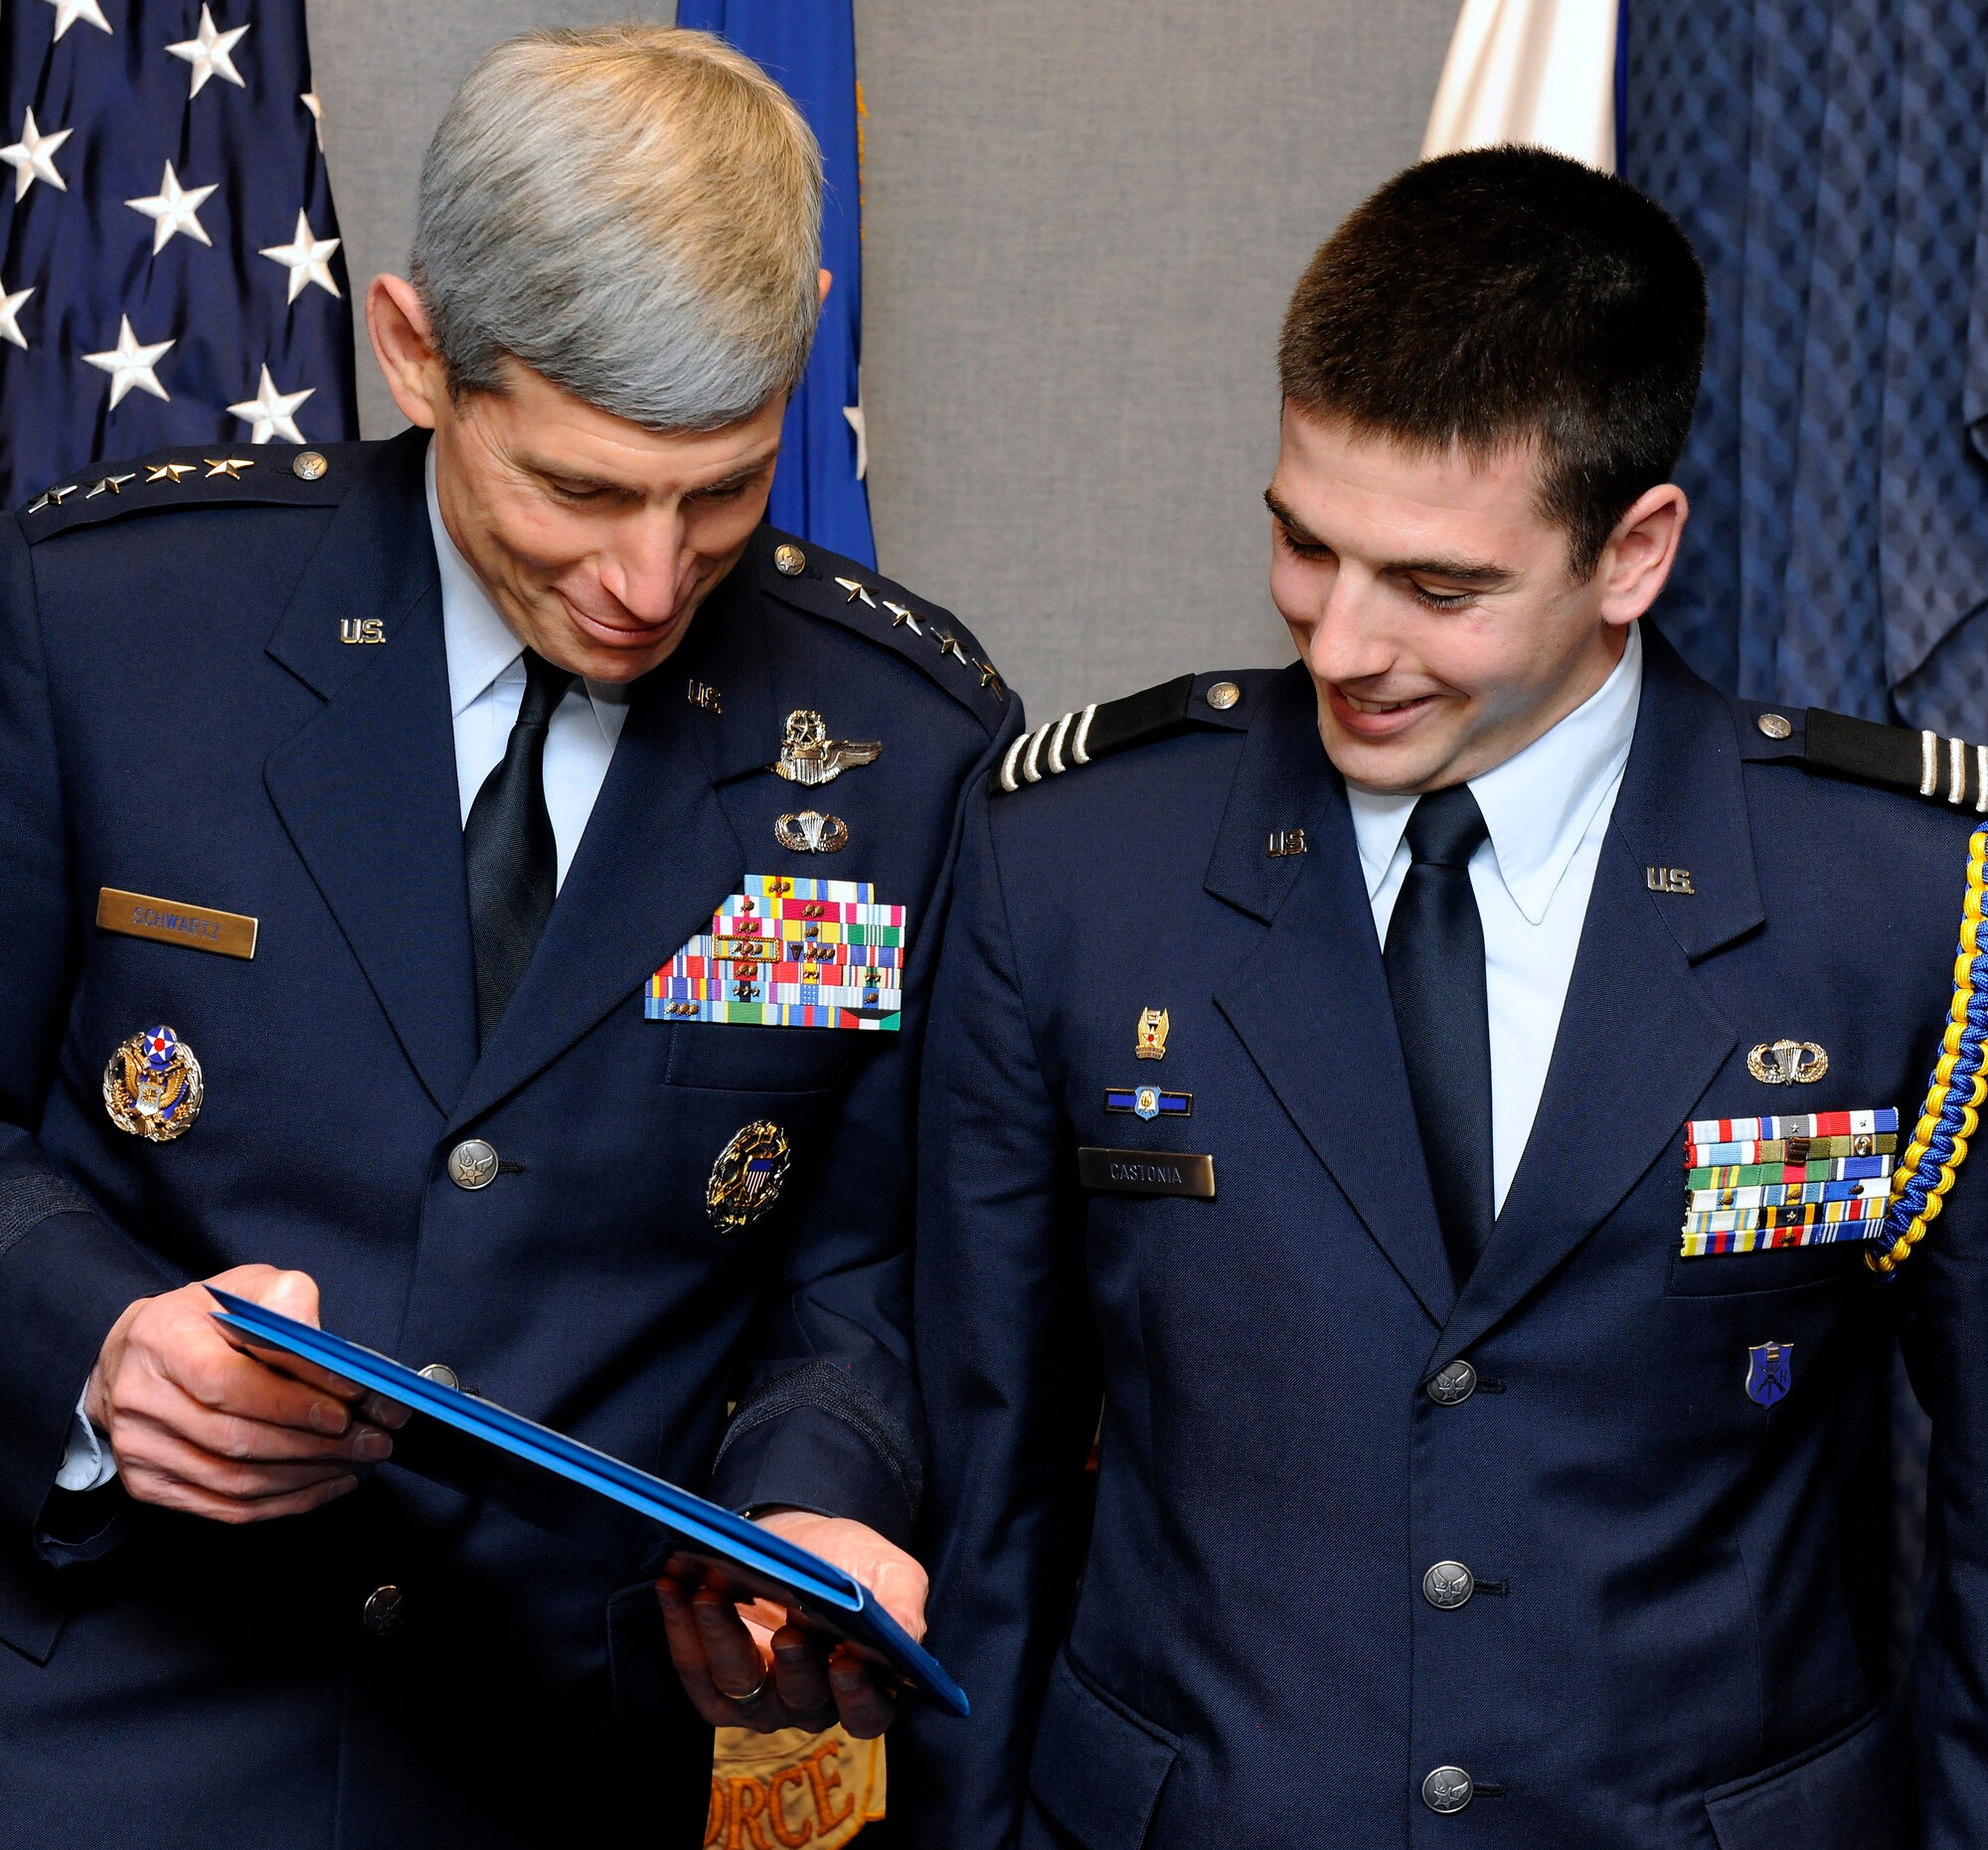 Air Force Chief of Staff Gen. Norton Schwartz shows Cadet Col. Ryan W. Castonia the citation accompanying his U.S. Air Force Cadet of the Year award for 2009 in the Pentagon April 5, 2010.  Cadet Castonia is a graduate student at Massachusetts Institute of Technology and a member of MIT's Reserve Officer Training Corps.  (U.S. Air Force photo/Scott M. Ash)